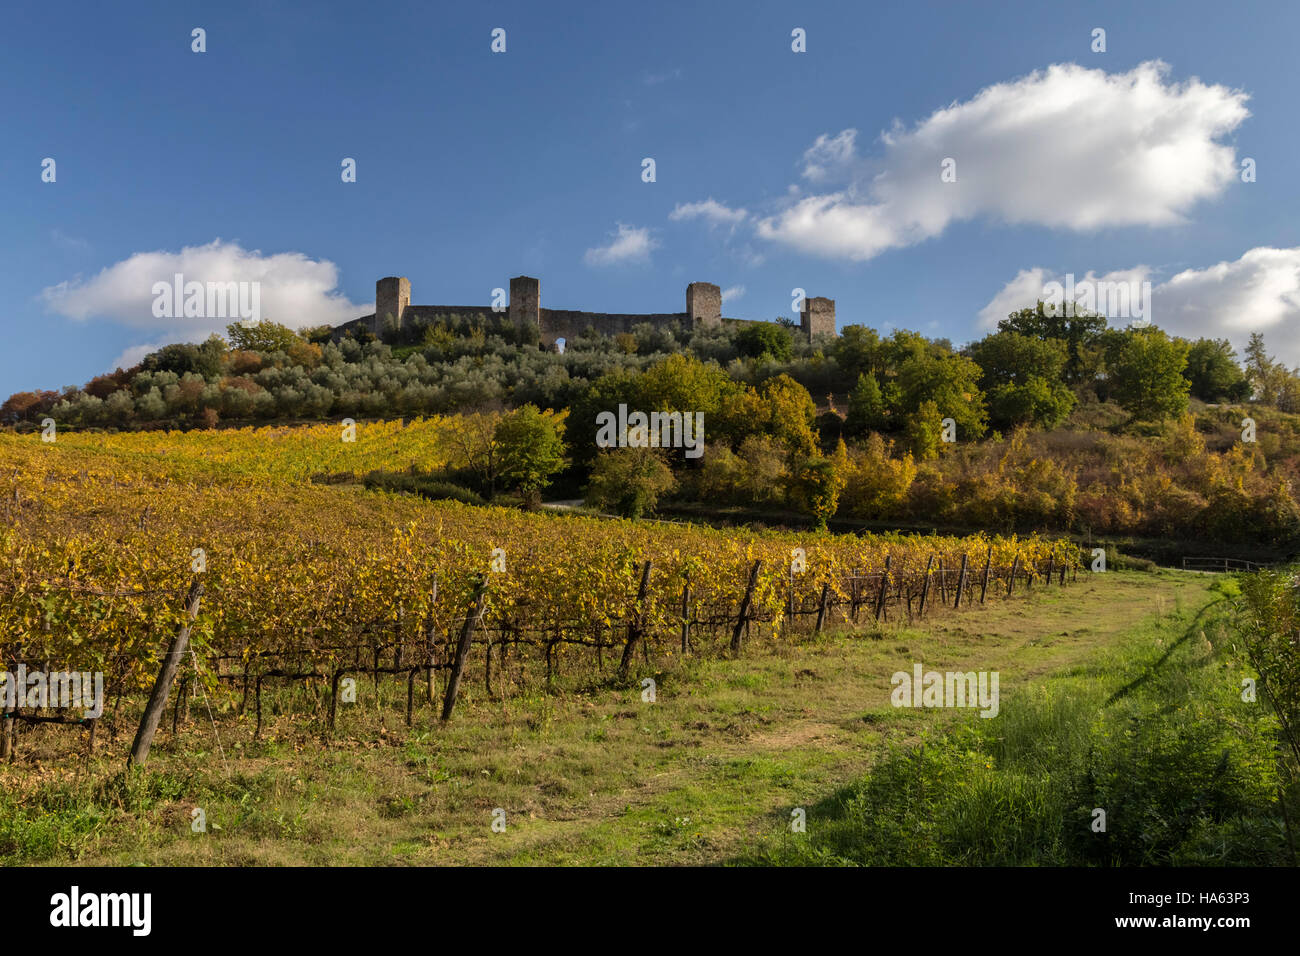 Autumnal fields near the medieval walls of Monteriggioni, Tuscany, Italy. Stock Photo